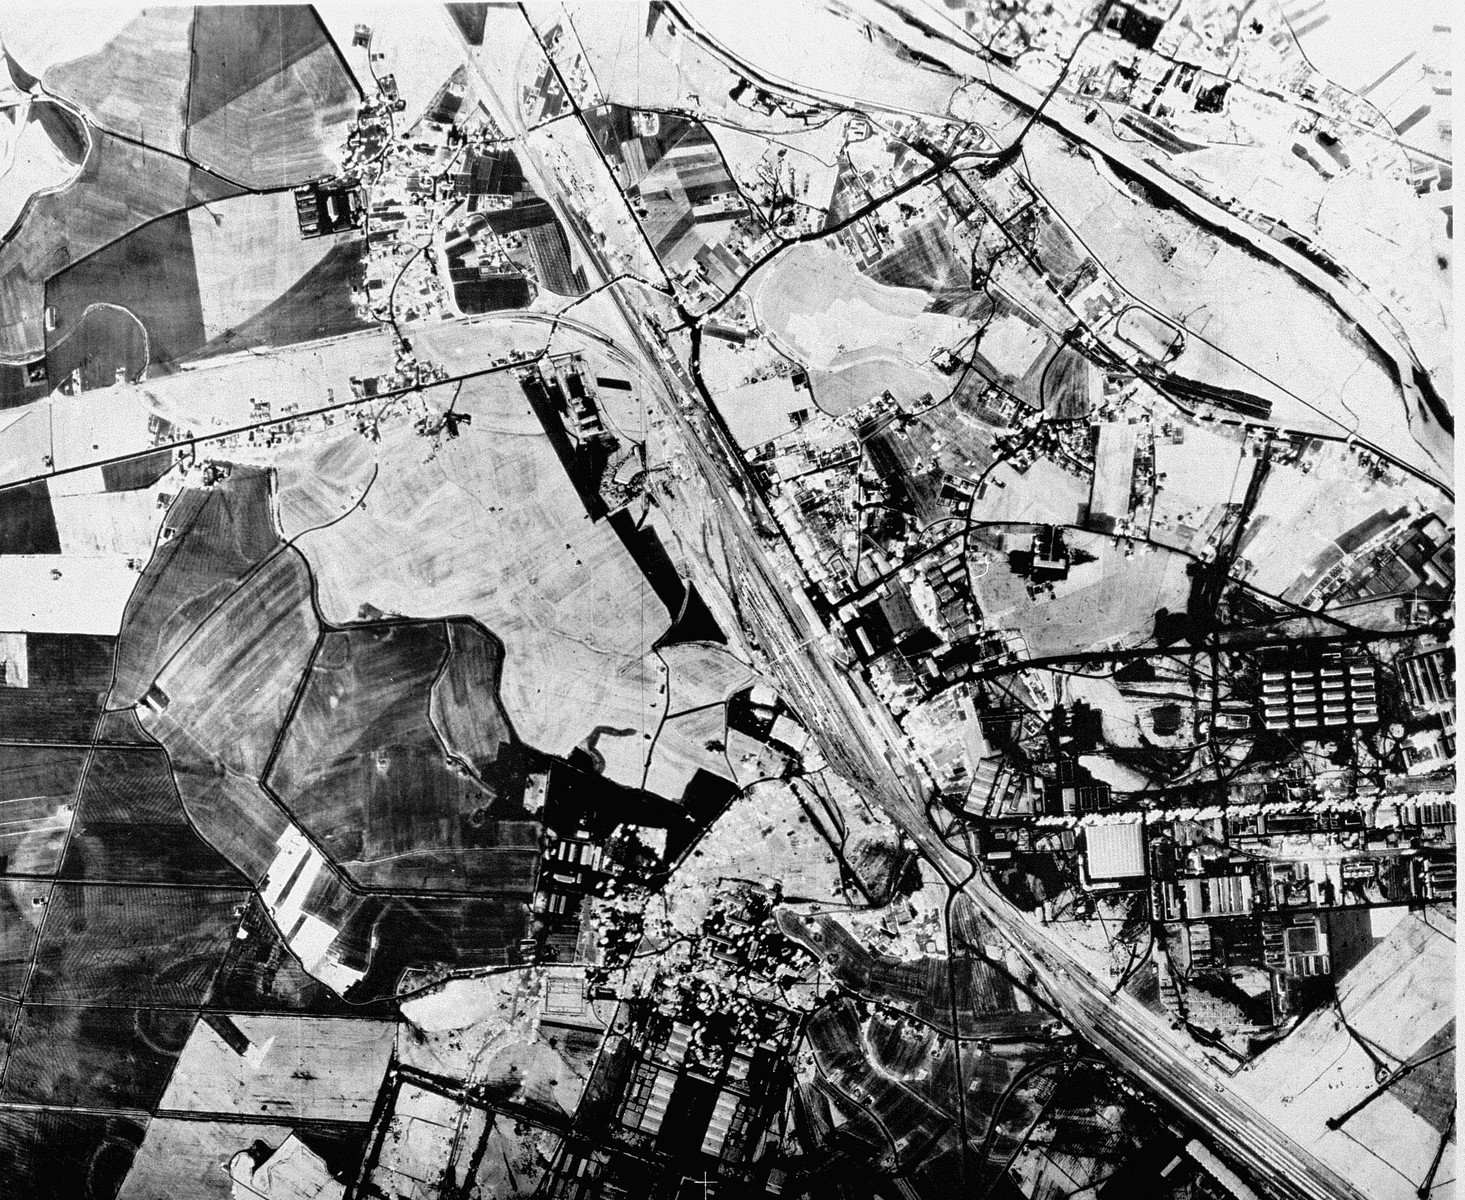 An aerial reconnaissance photograph of  Auschwitz I showing the administrative area as well as the railway lines to the camp.